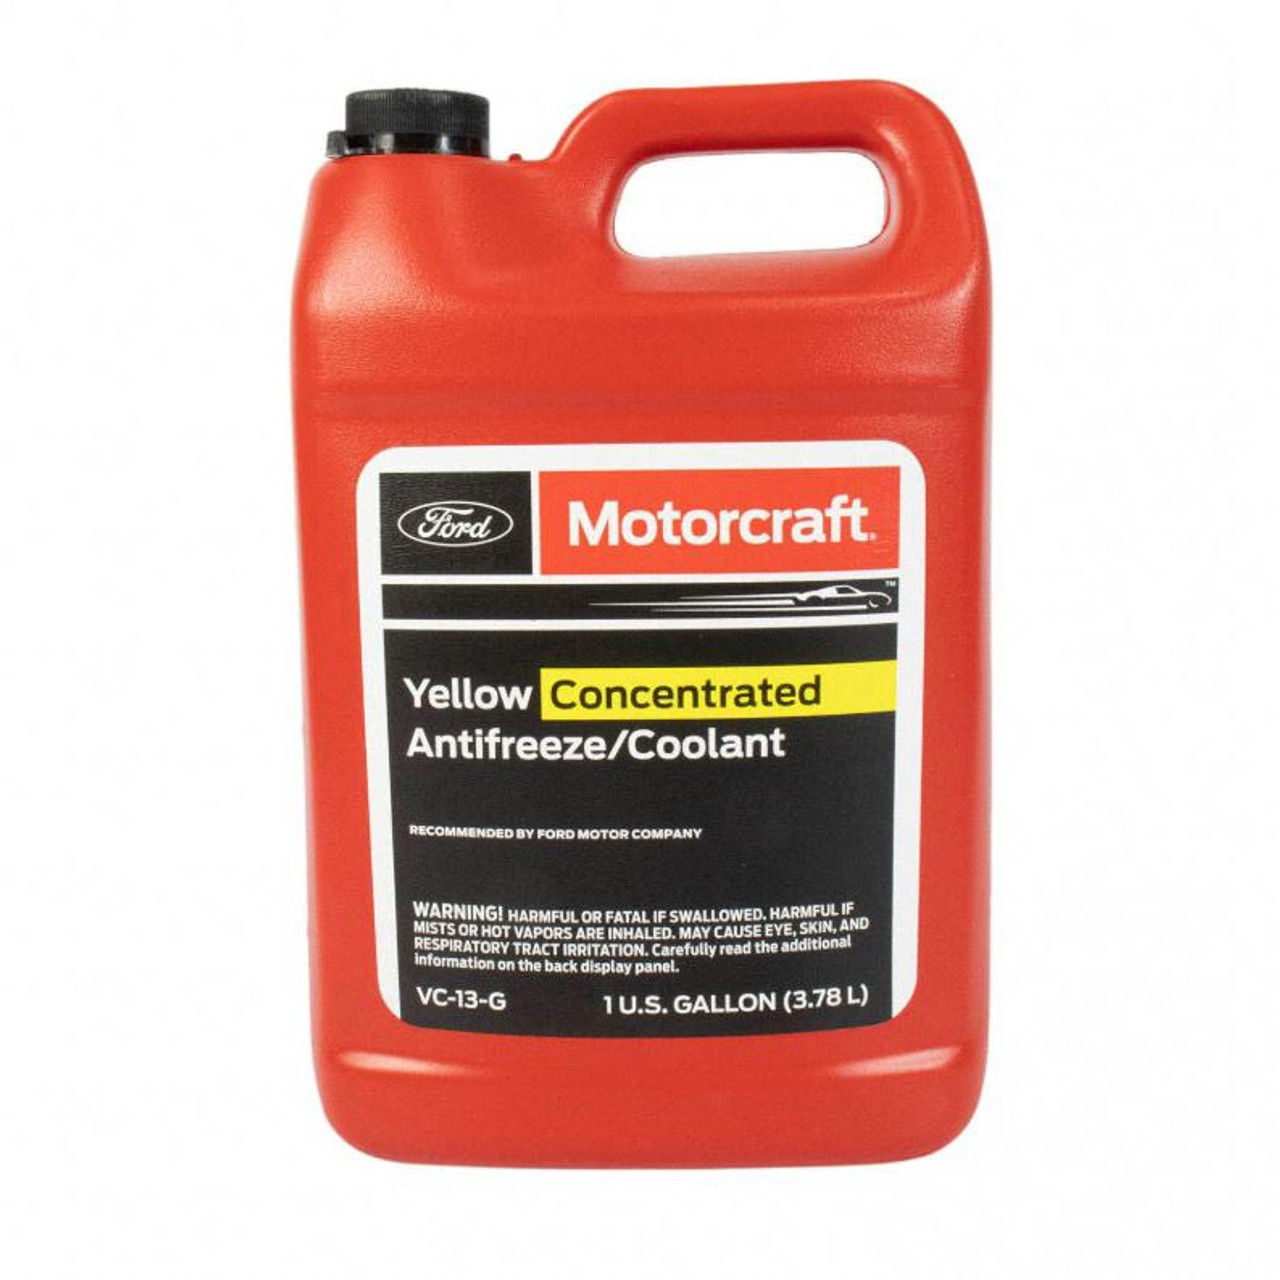 MOTORCRAFT YELLOW CONCENTRATED ANTIFREEZE/COOLANT 2011-2021 6.7L (1-GALLON BOTTLE) (FOVC-13-G)-Main View